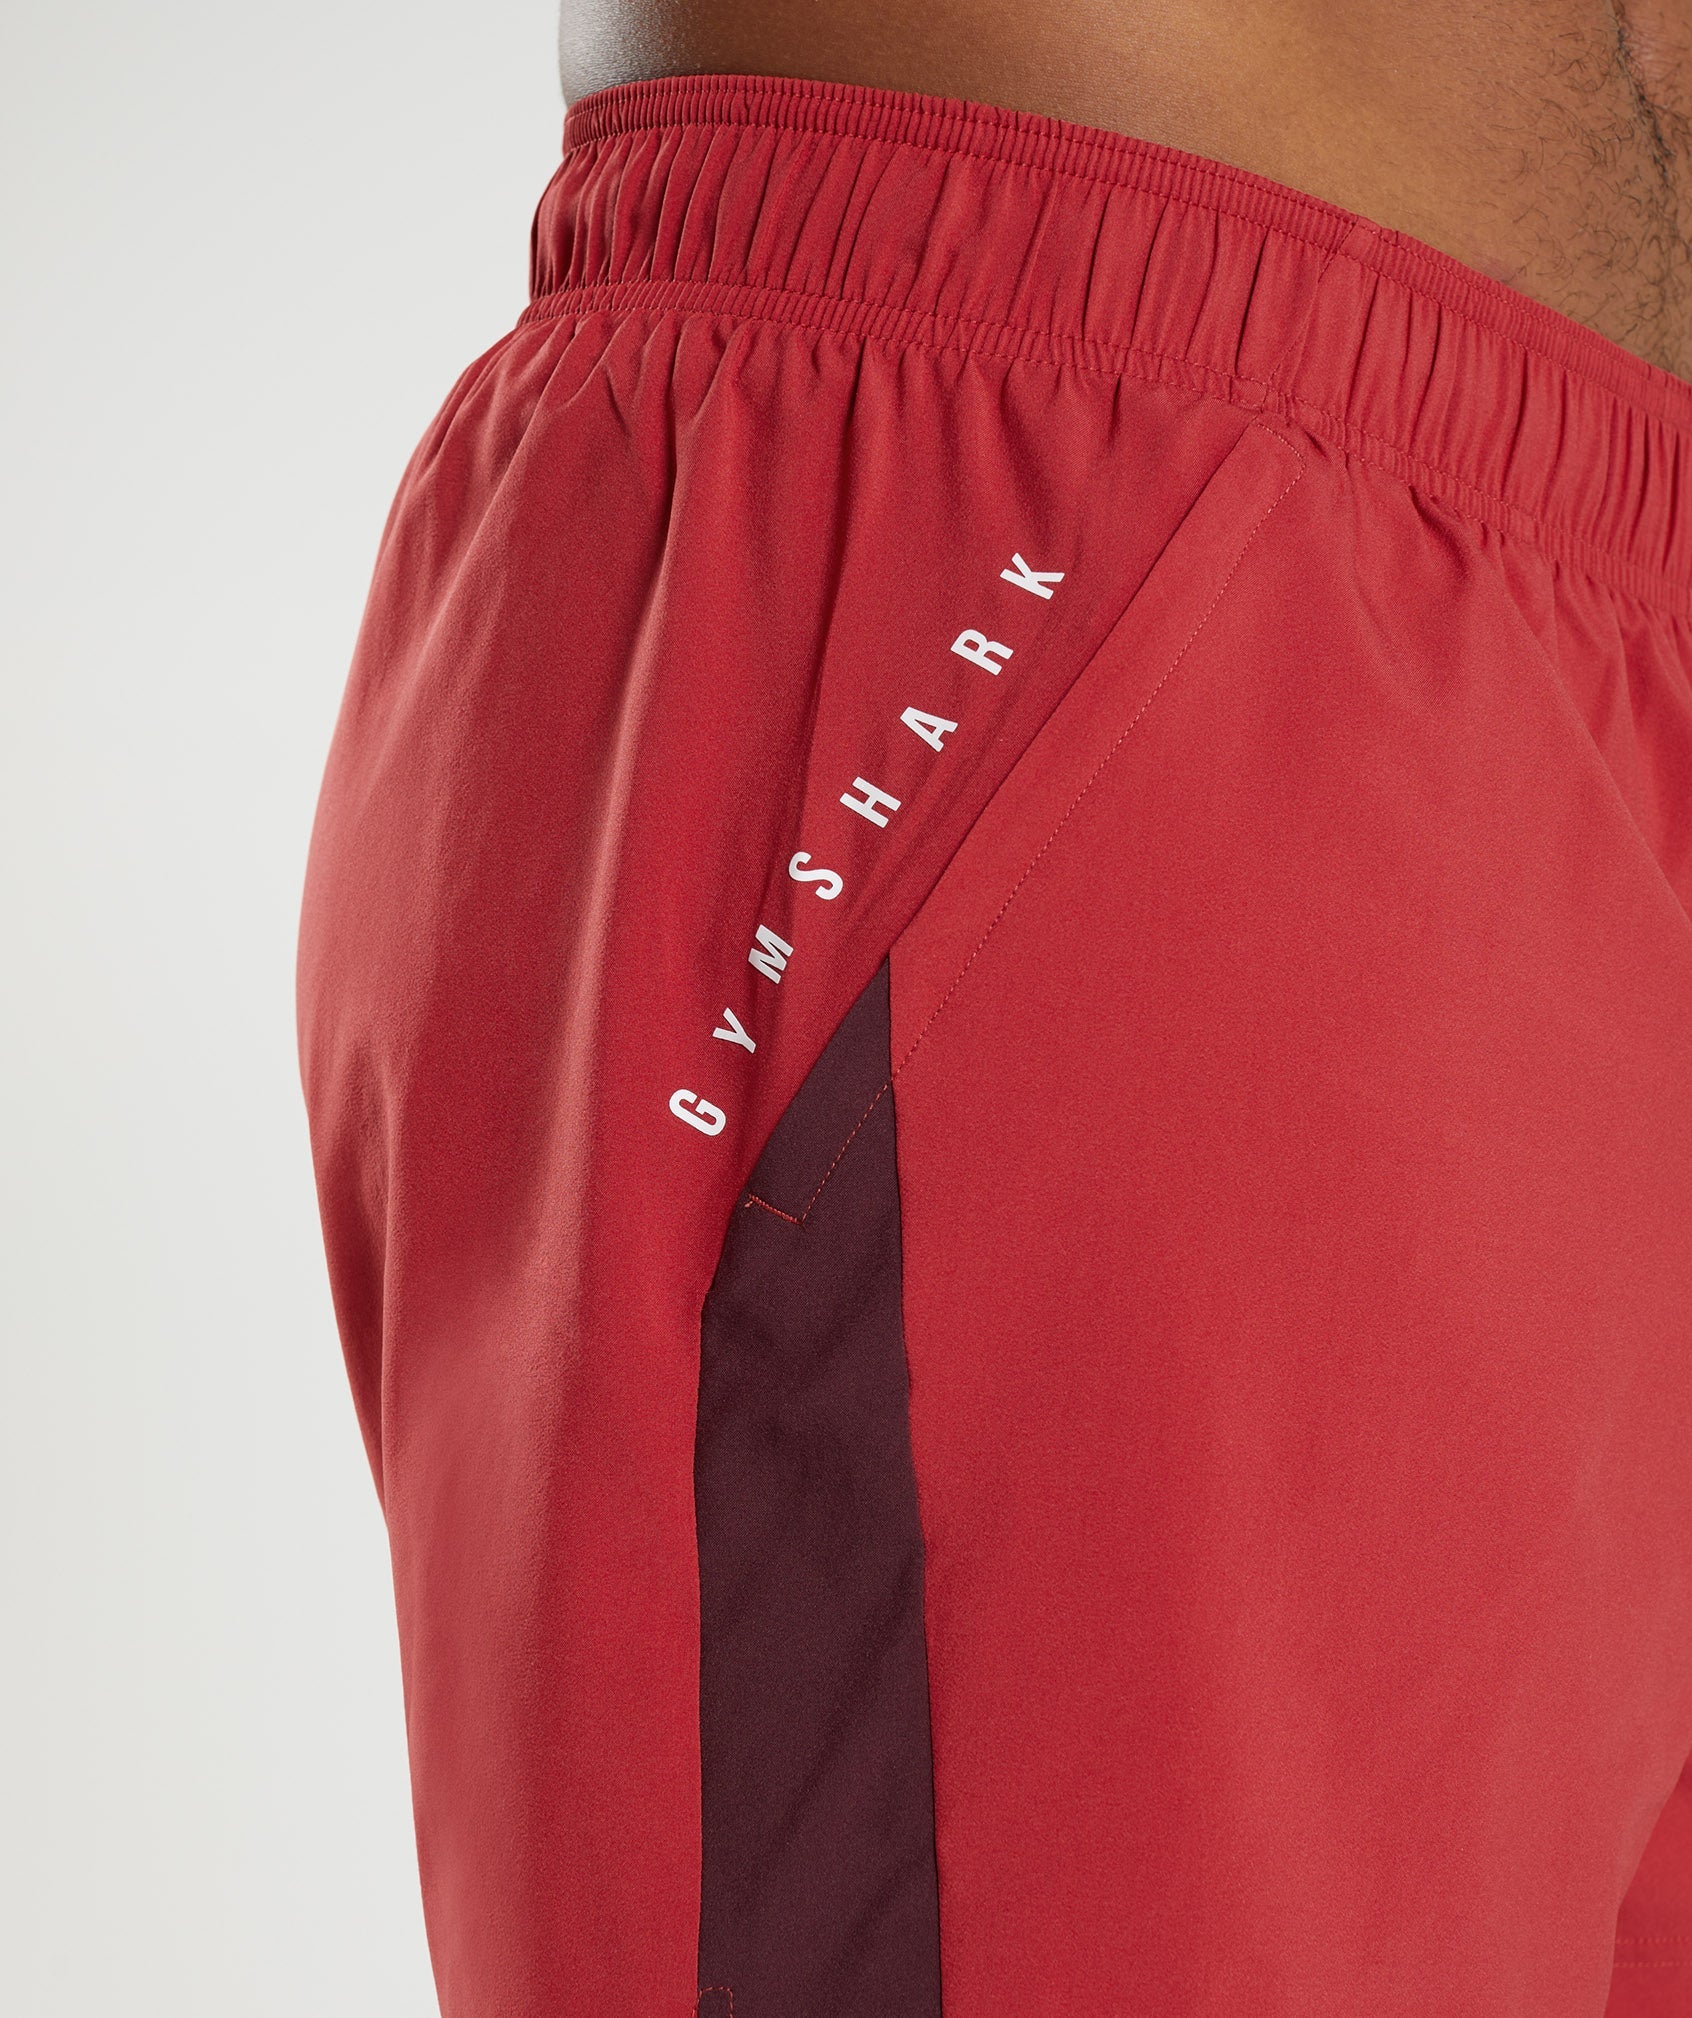 Sport Shorts in Salsa Red/Baked Maroon - view 5